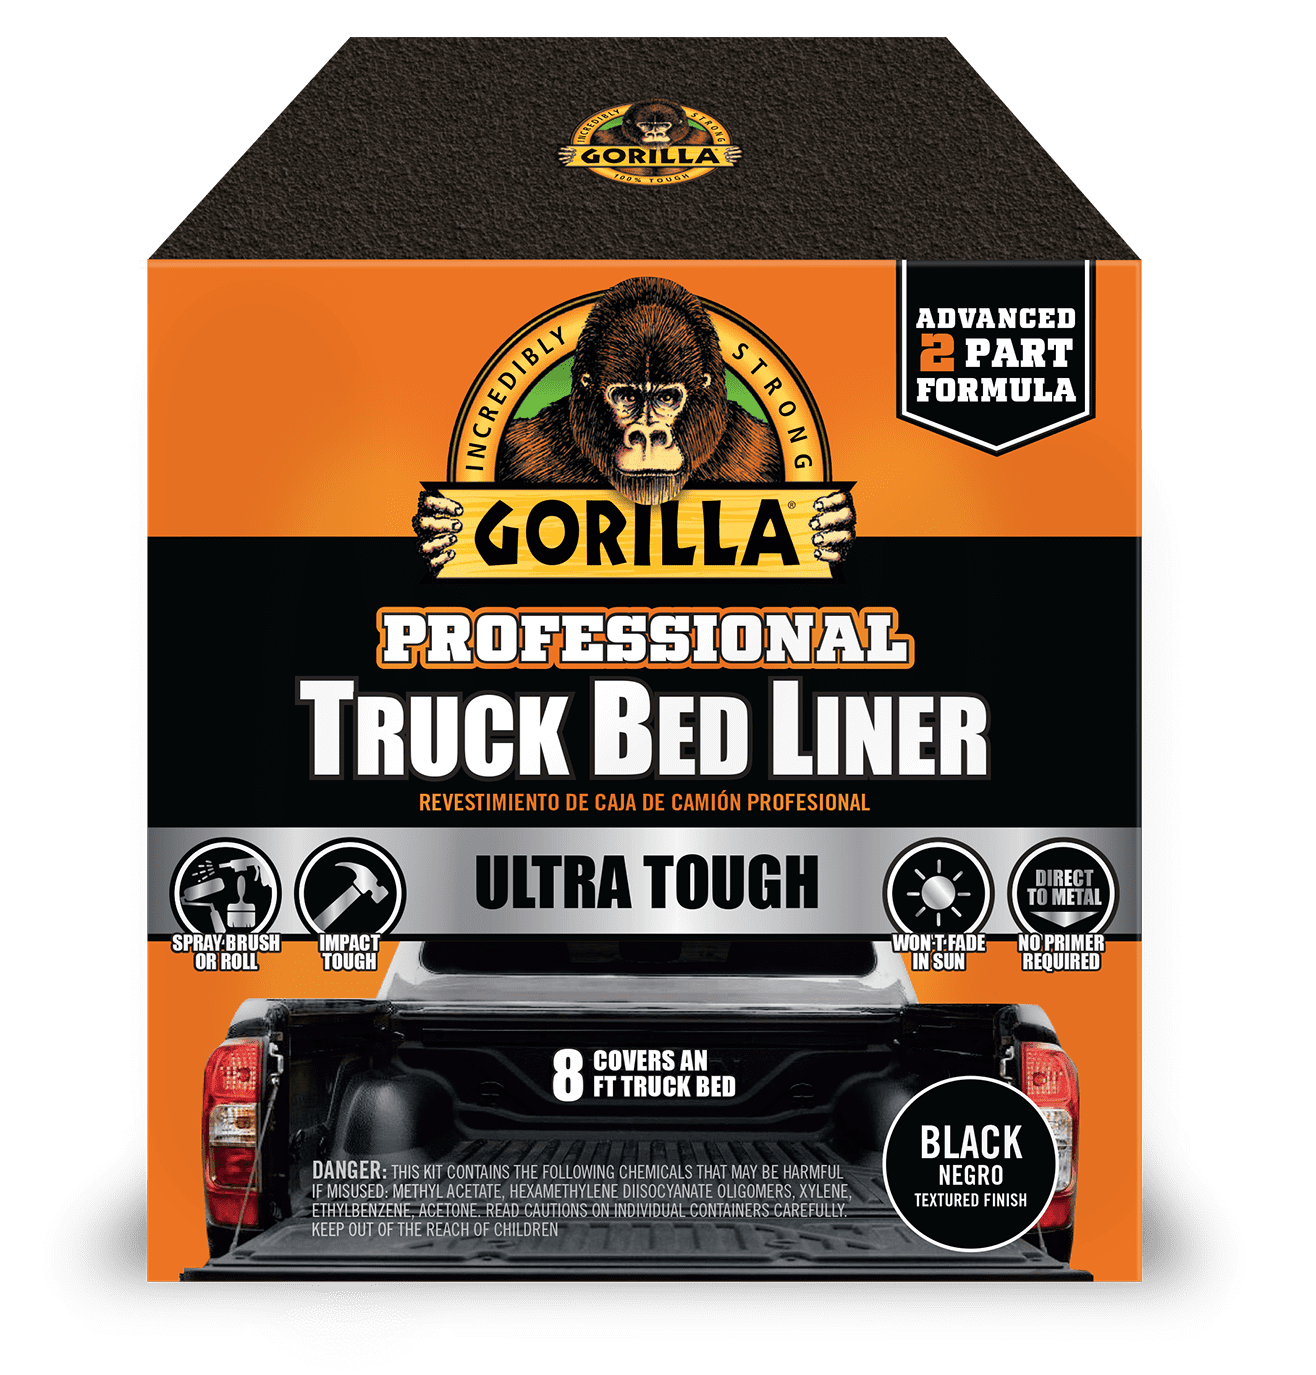 Professional truck bed liner product